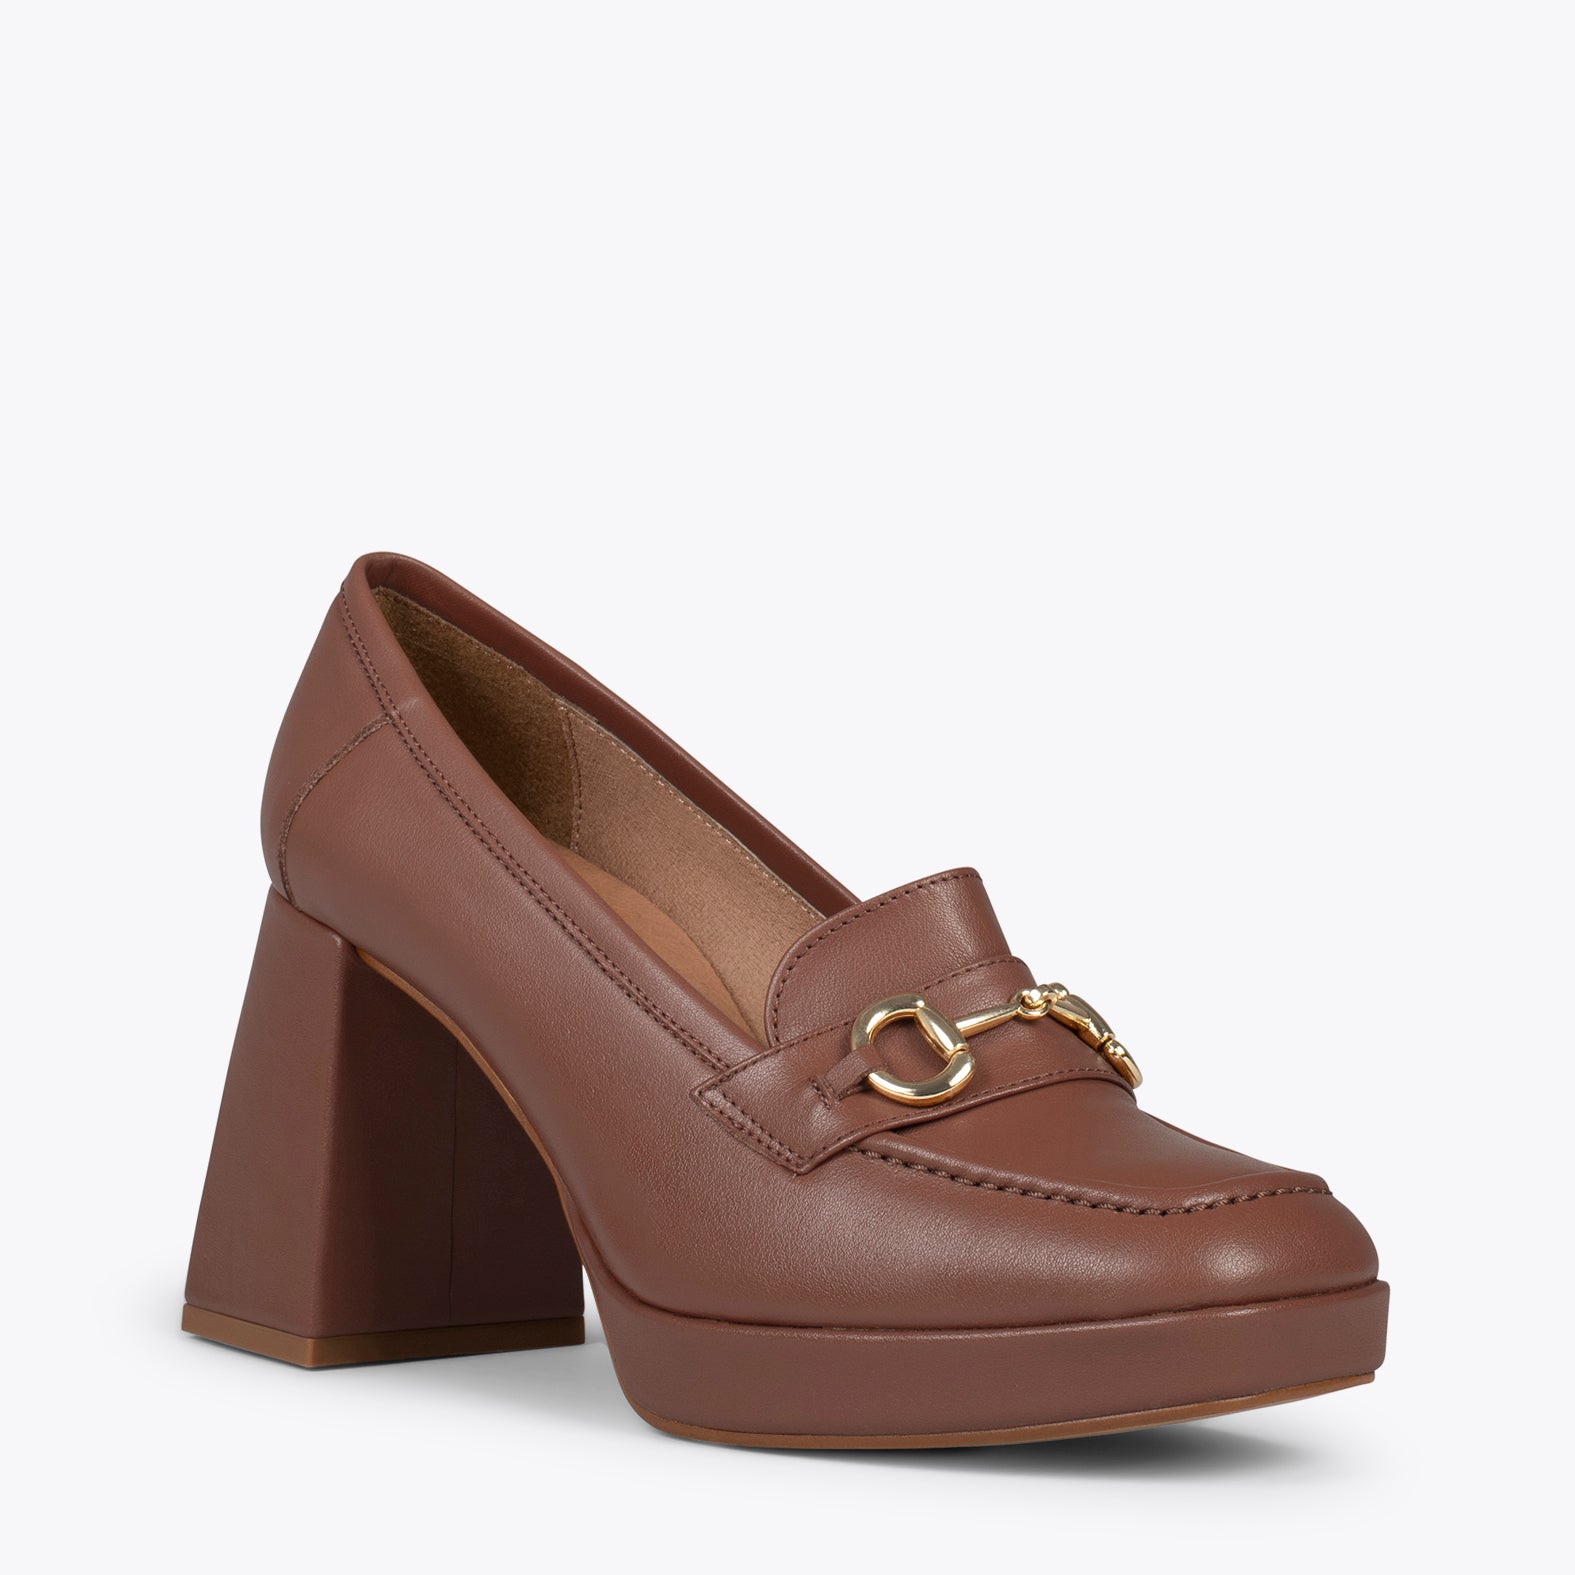 ANNETTE – BROWN moccasins with block heel and platform